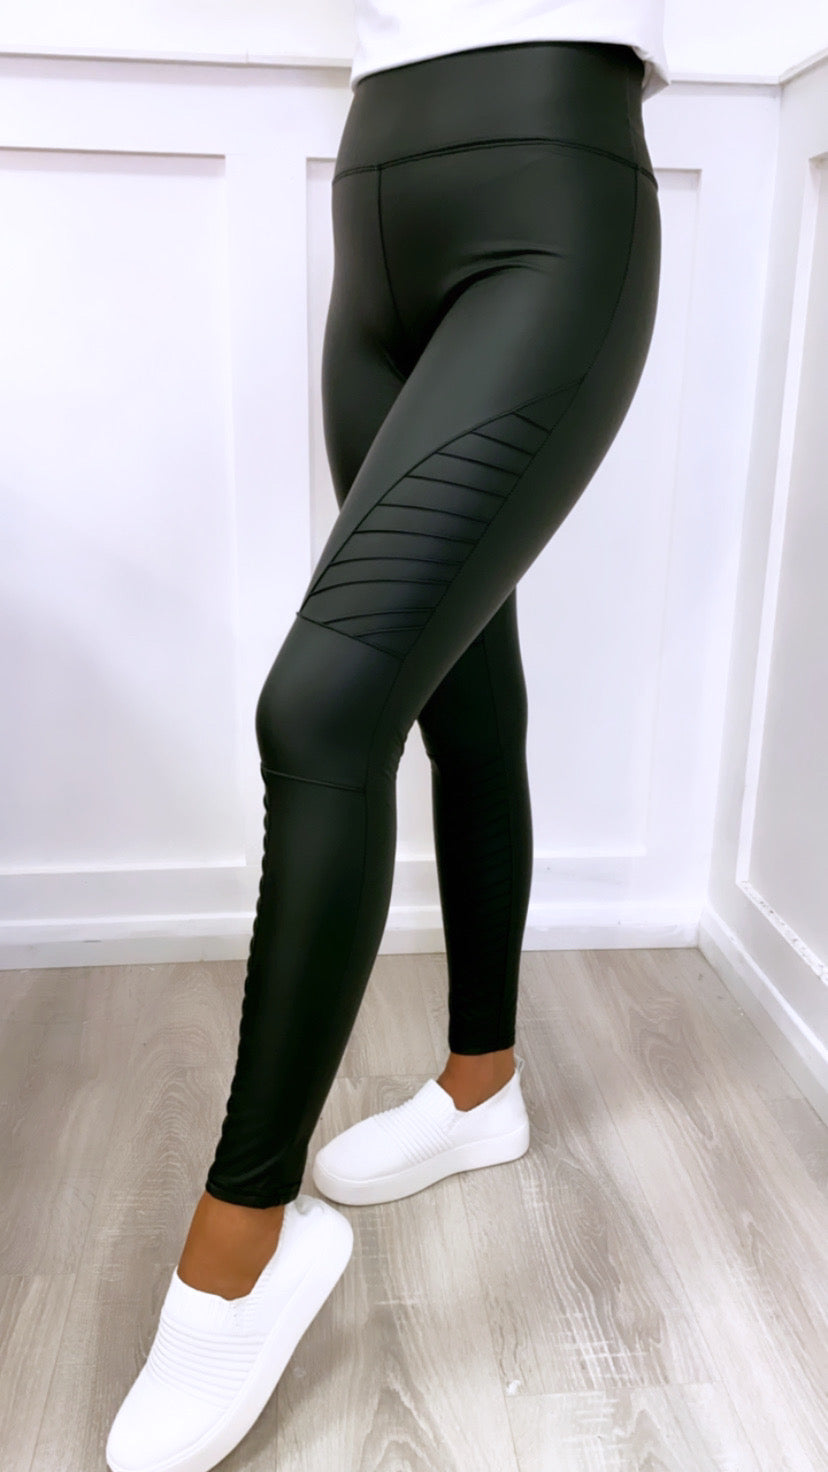 Verso - Our most wanted / sell out leggings are also back